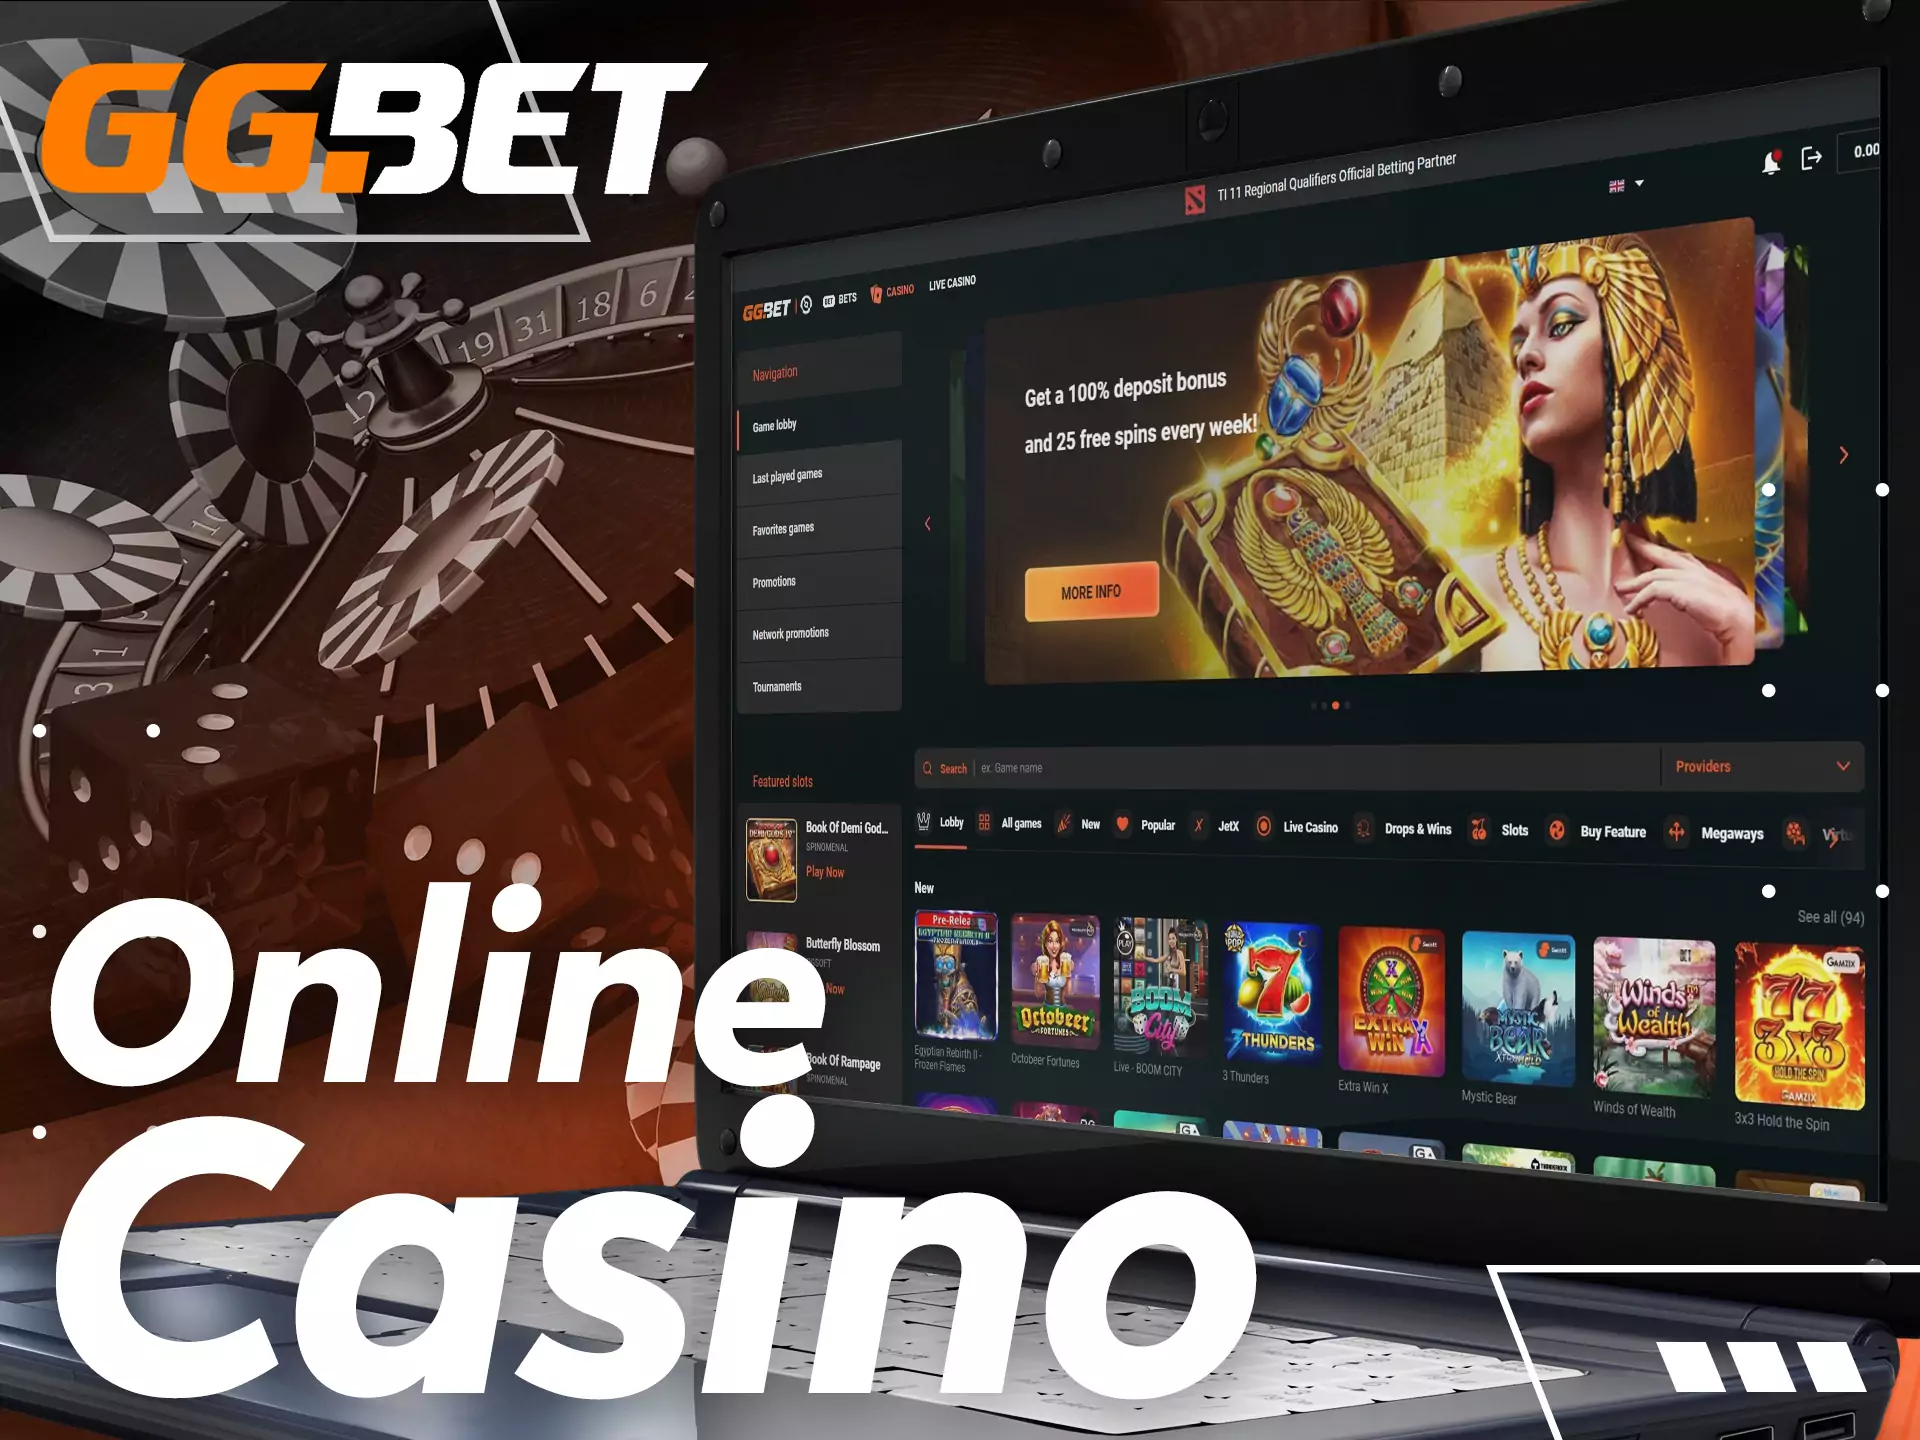 The GGBet online casino includes slots, table games, bingo and many others.